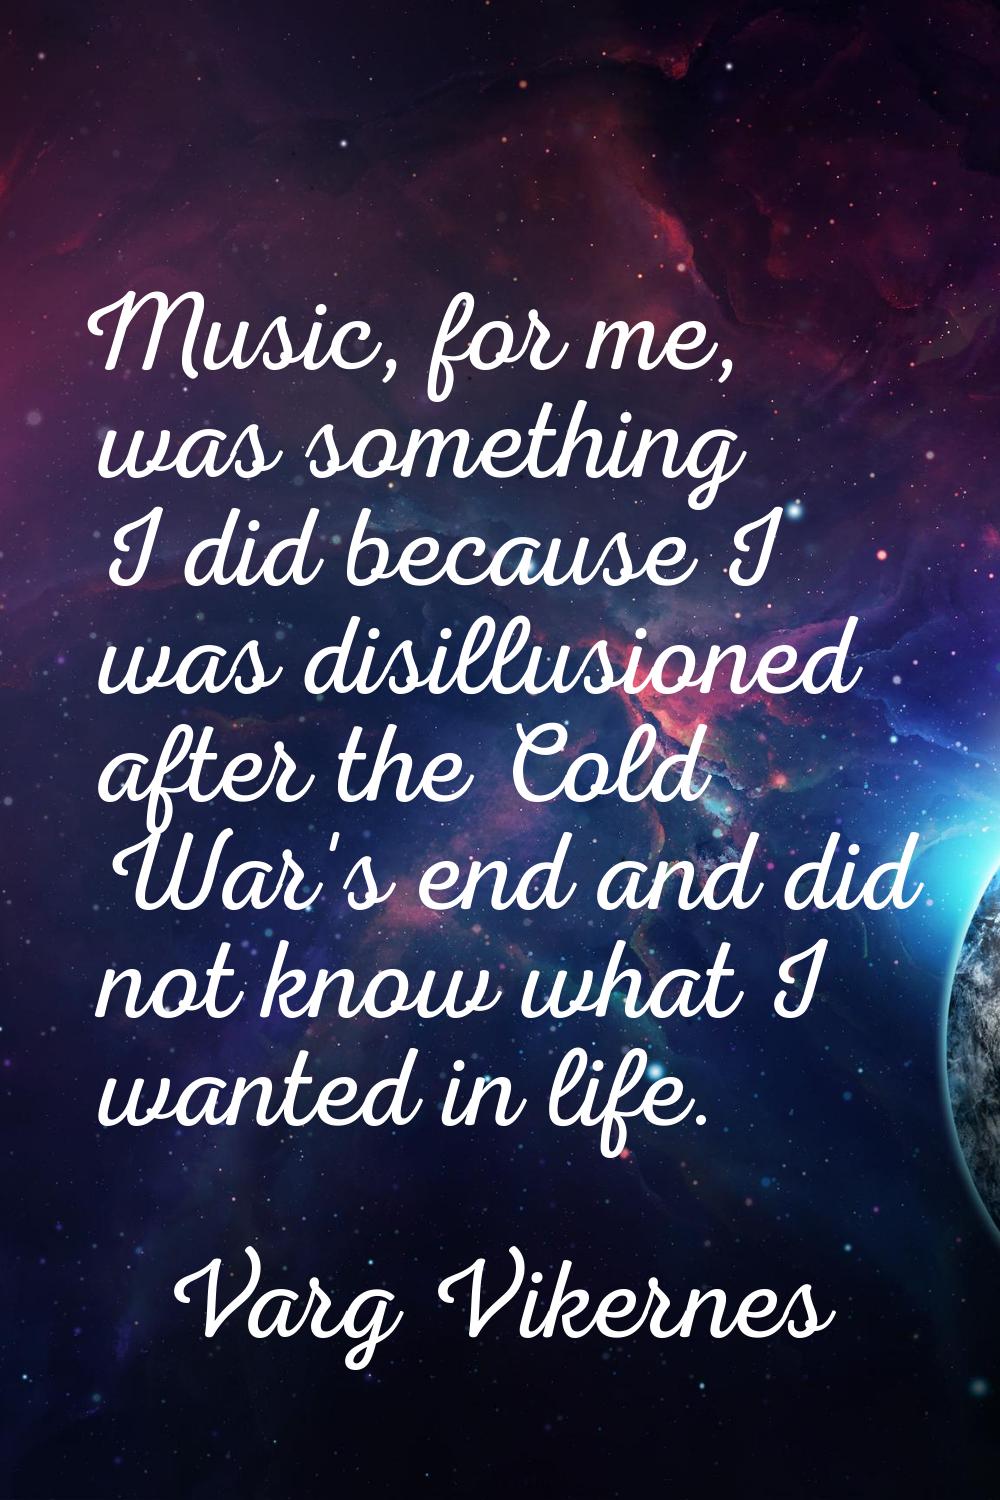 Music, for me, was something I did because I was disillusioned after the Cold War's end and did not